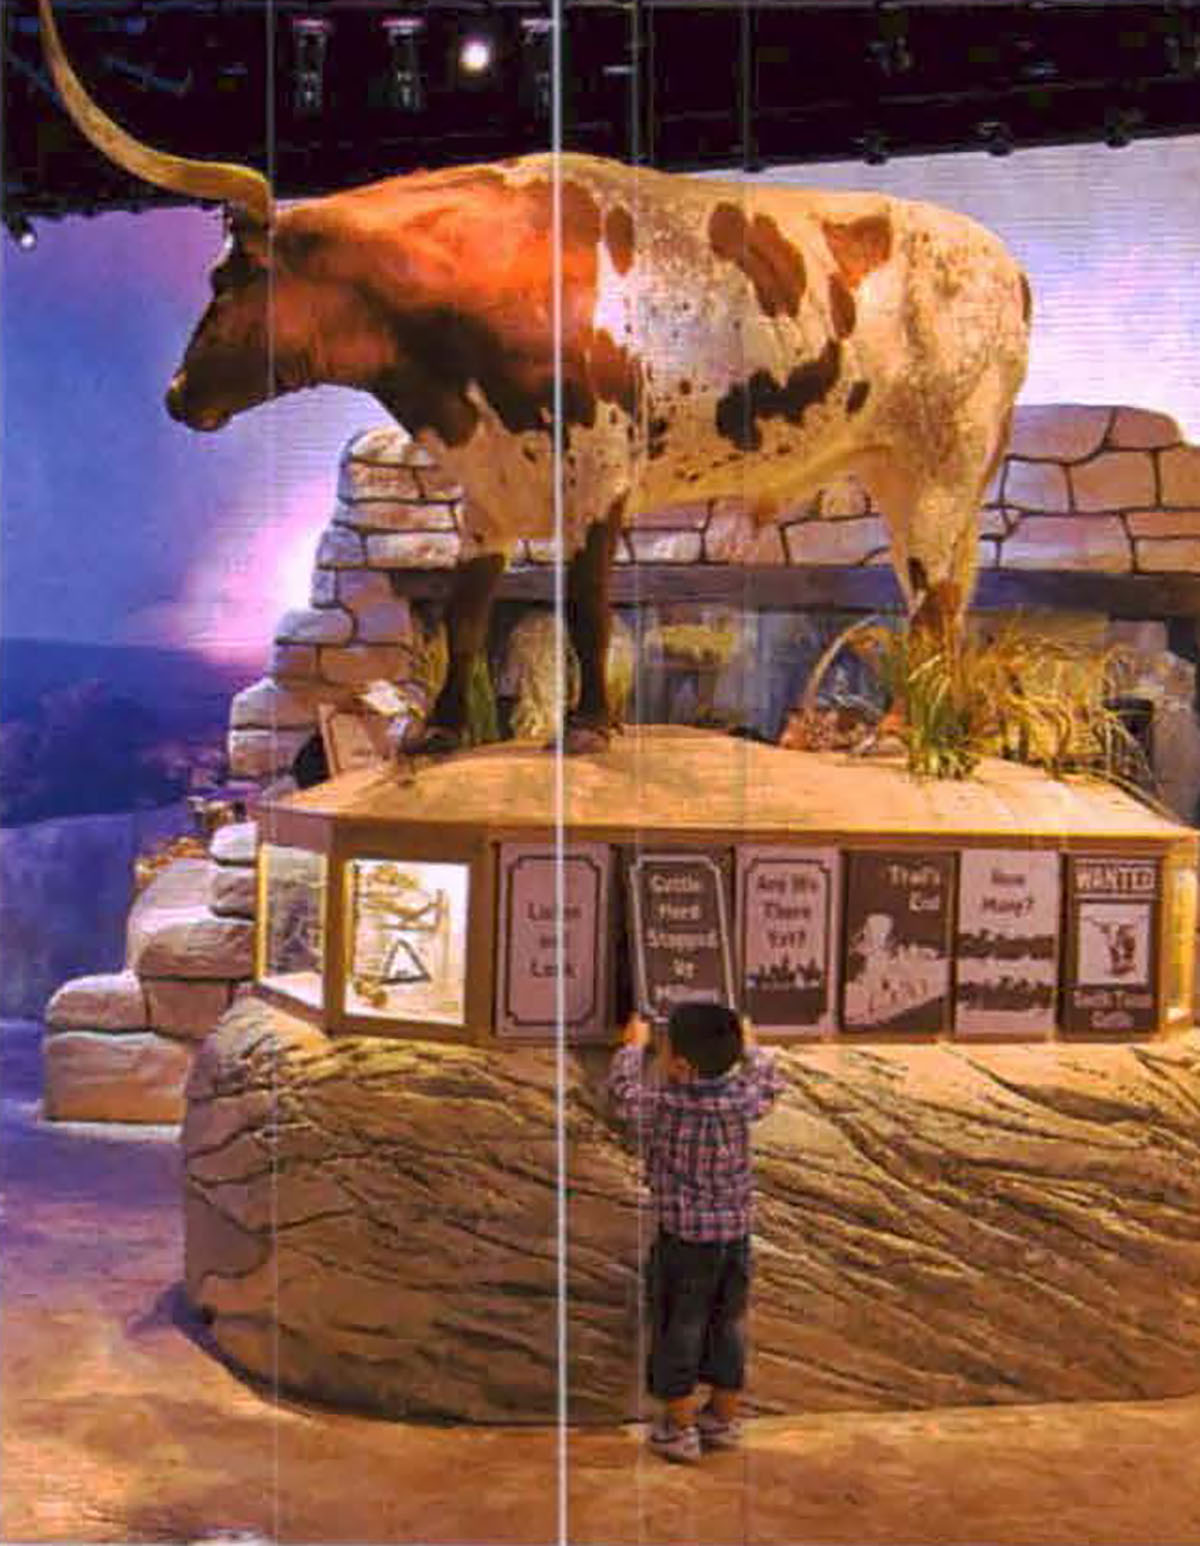 Child standing below a cattle display